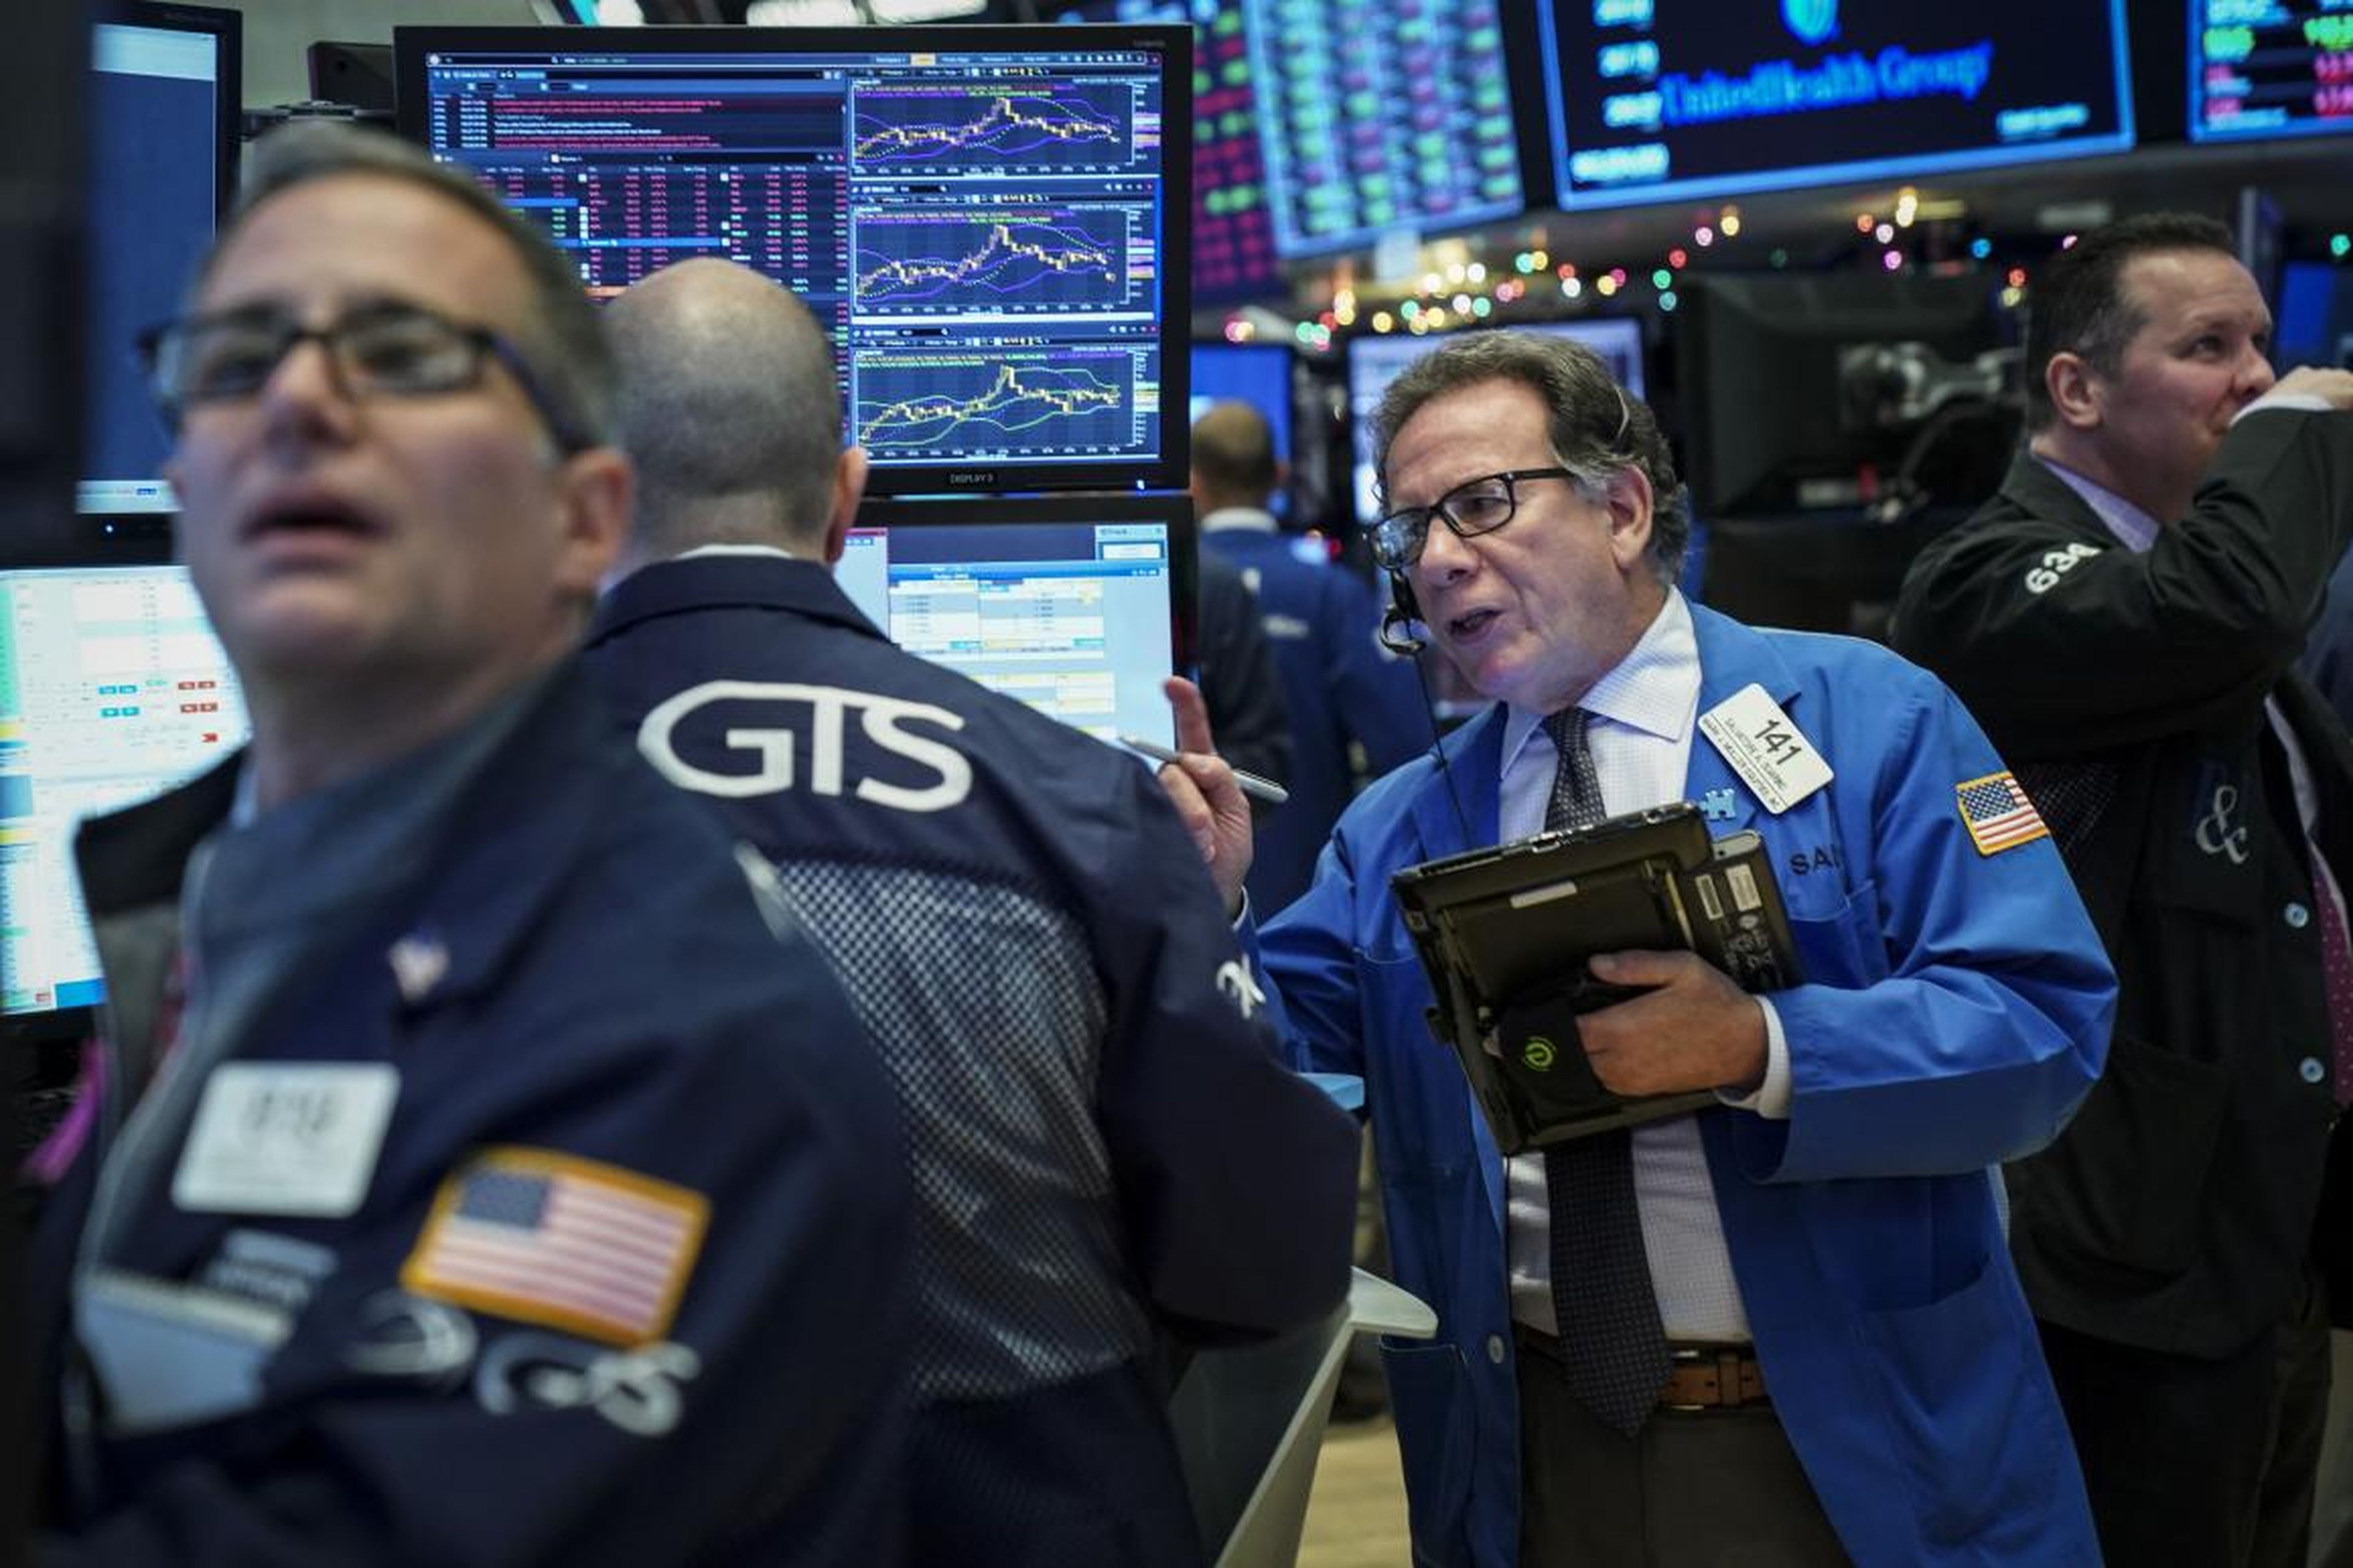 Traders work ahead of the opening bell on the floor of the New York Stock Exchange.